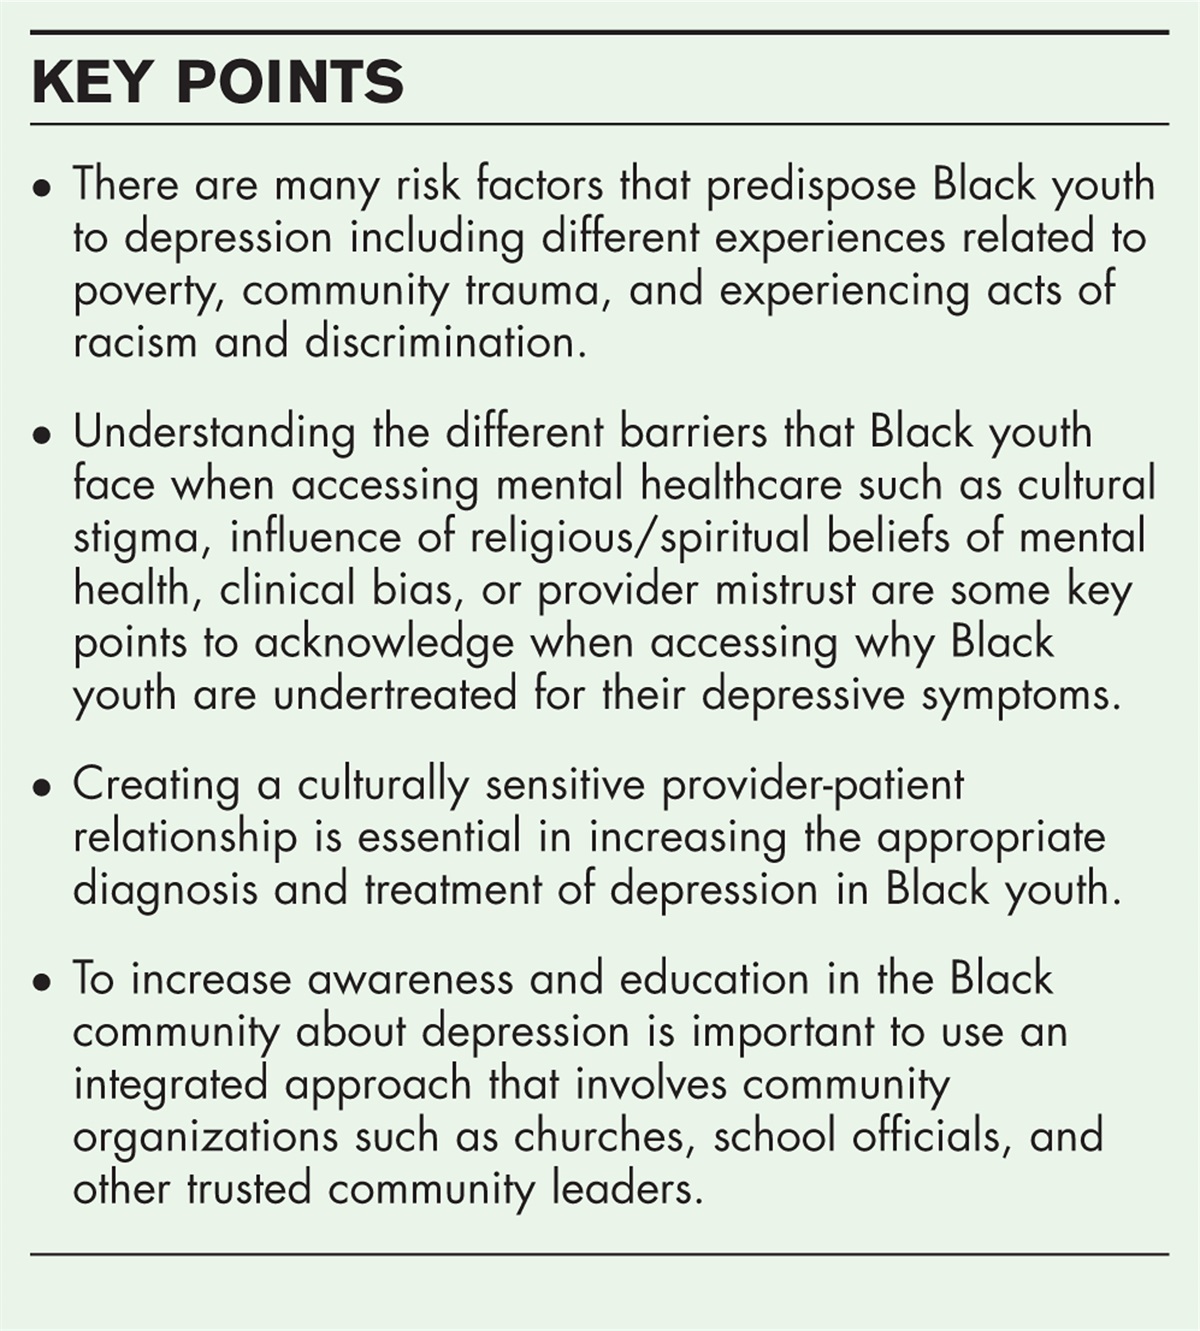 A review on the disparities in the identification and assessment of depression in Black adolescents and young adults. How can clinicians help to close the gap?